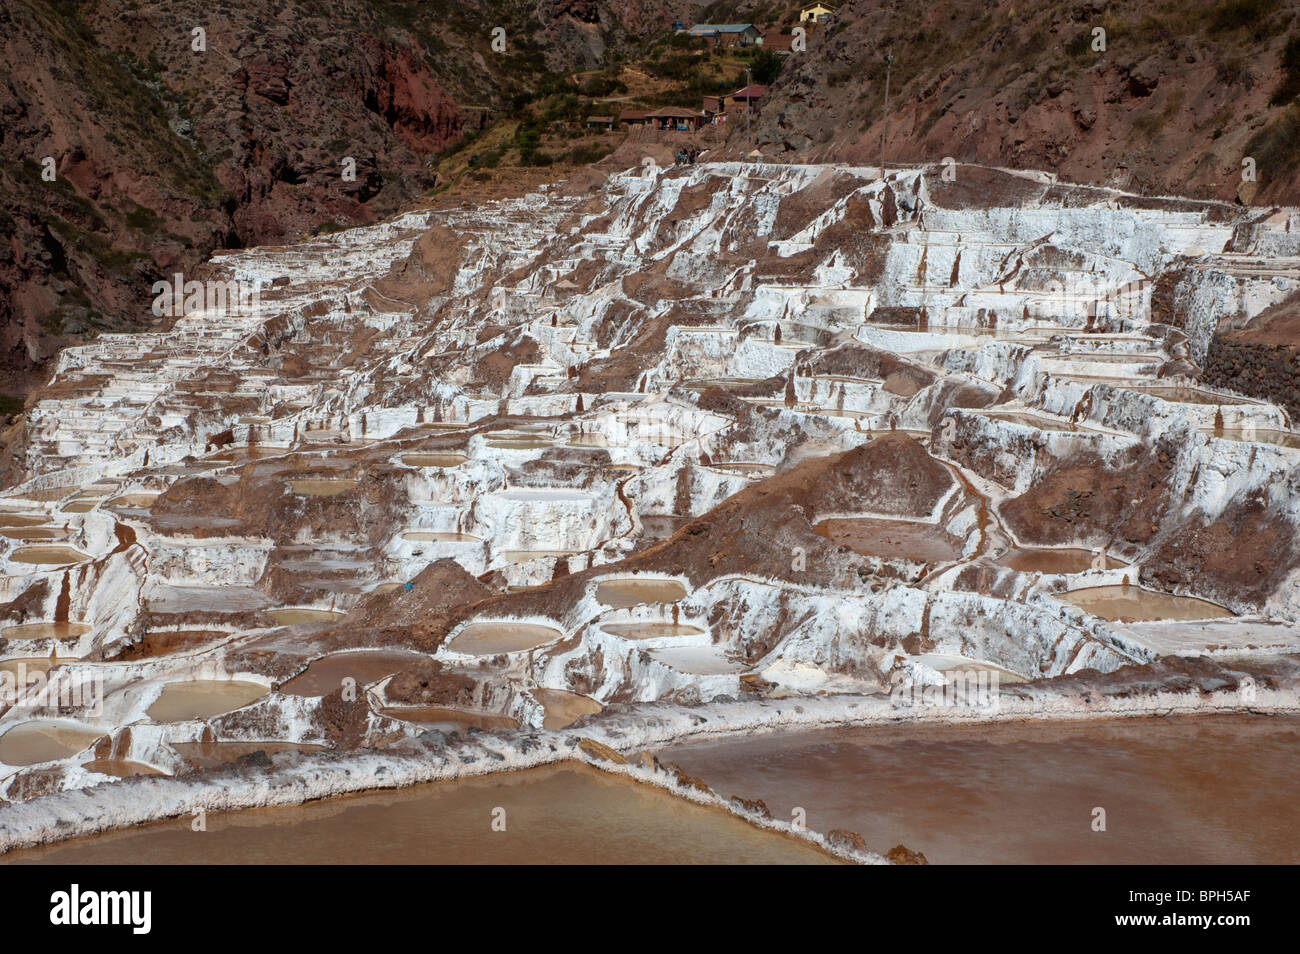 Salt pans dry out in the sun in the high Andes, at Salinas, in the Urubamba area of the Sacred Valley, Peru. Stock Photo